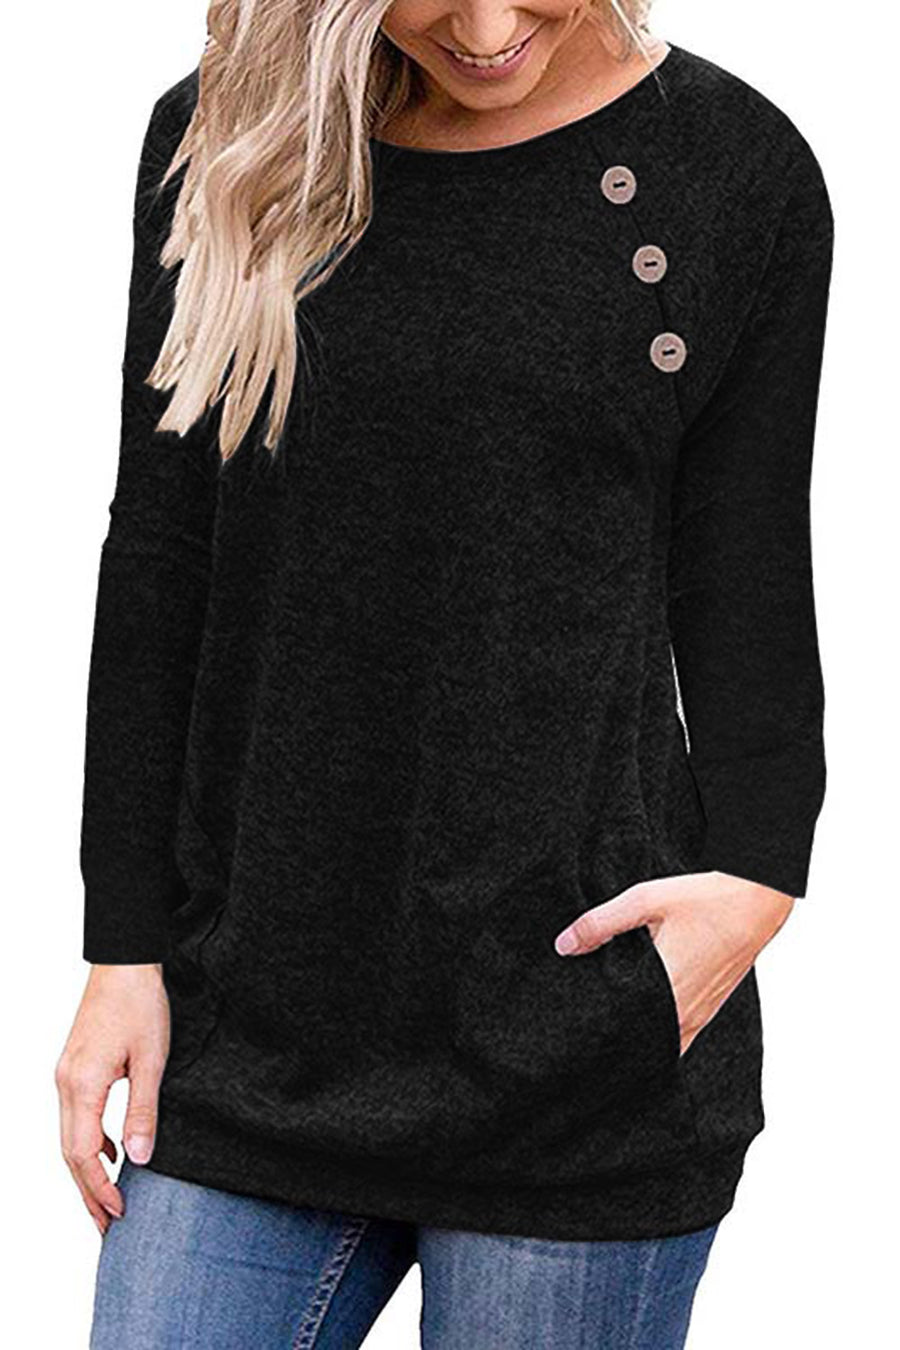 Women's Solid Crew Neck Raglan Button Stitched Long Sleeve T-shirt